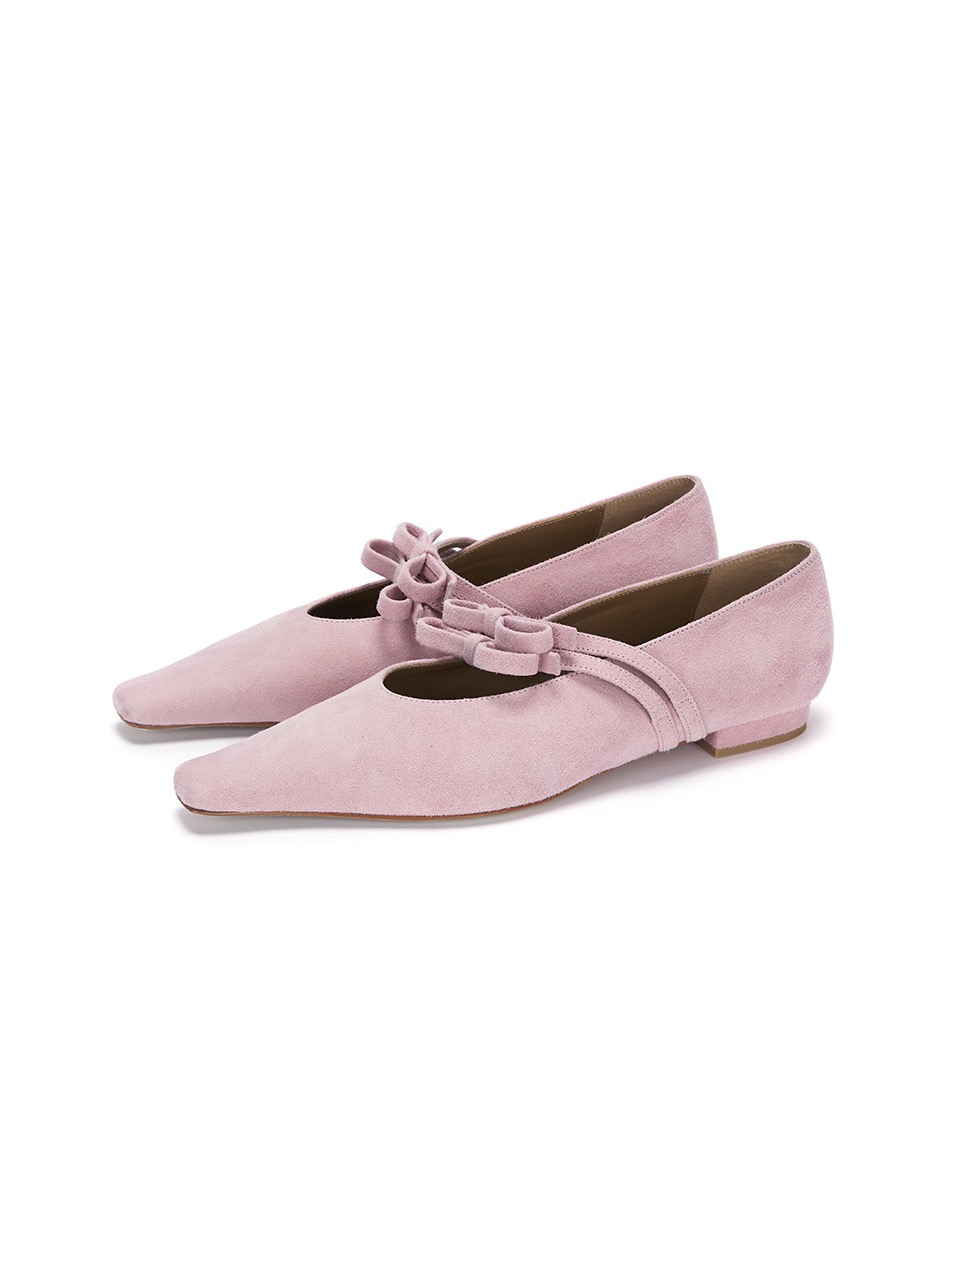 FLAT MARY JANE_pink suede